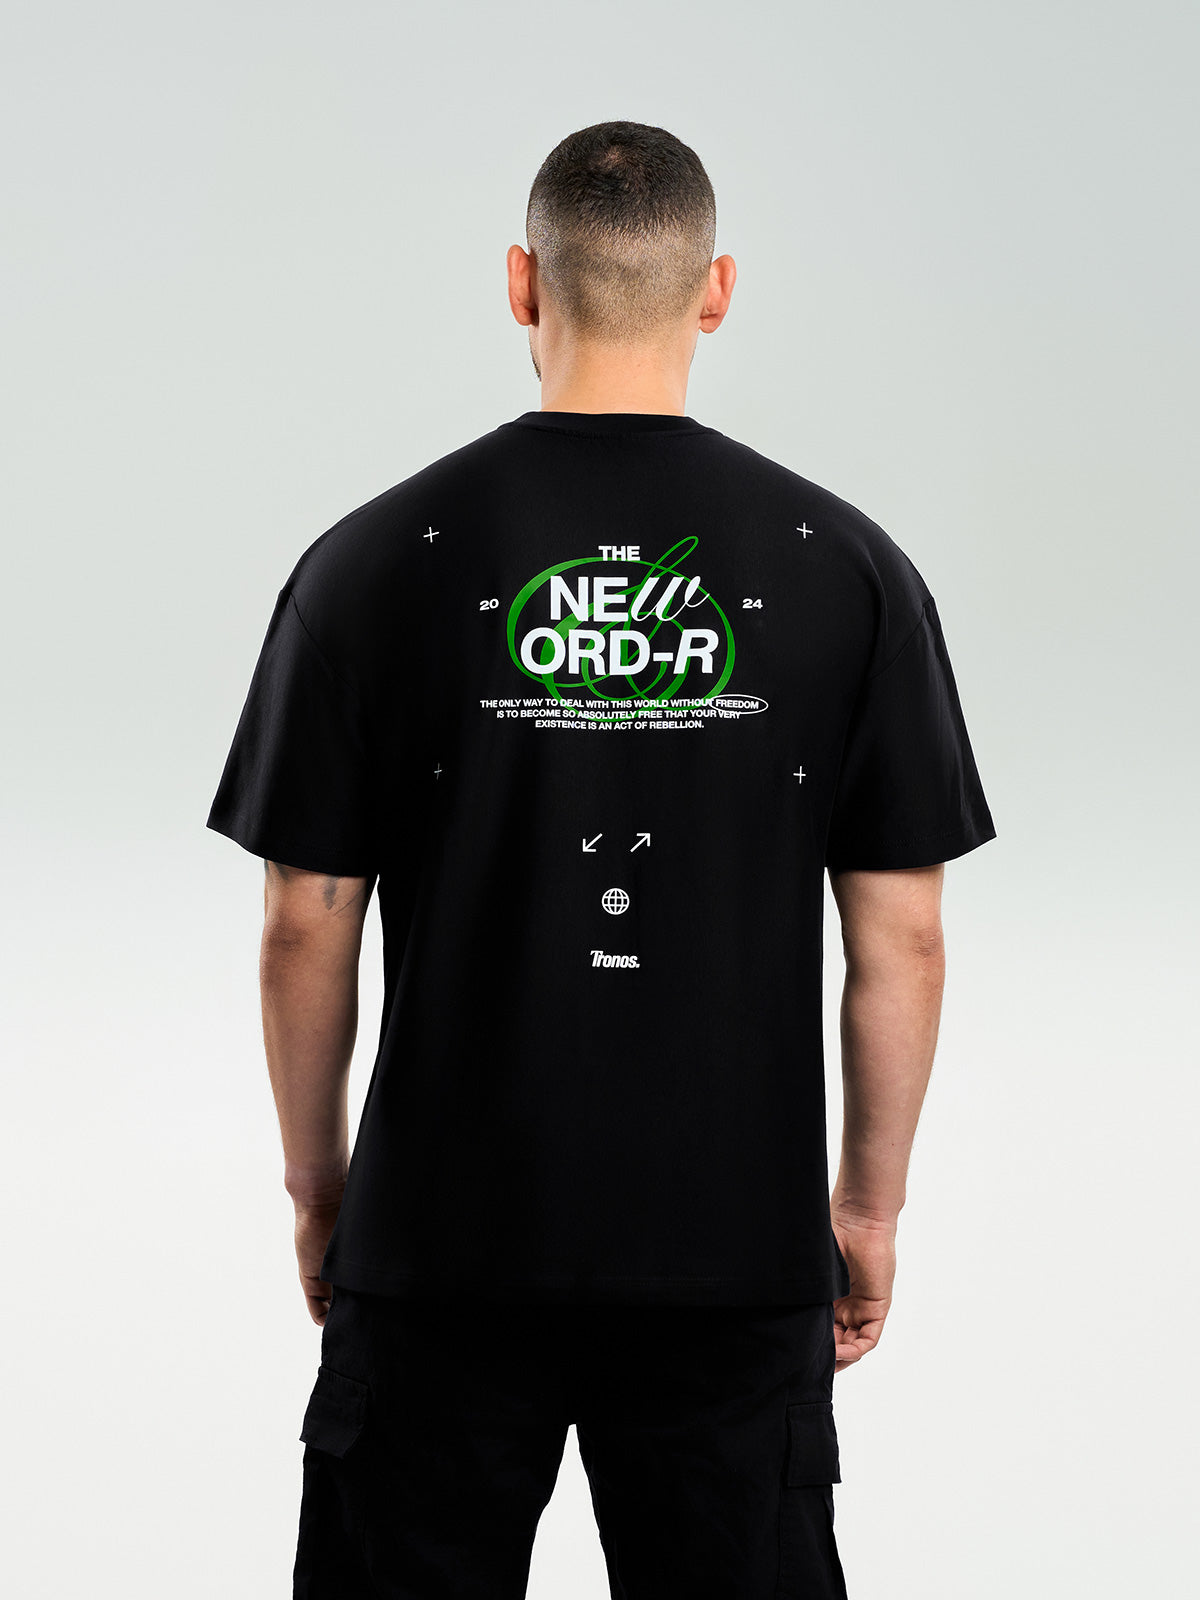 The New Order / Element T-Shirt